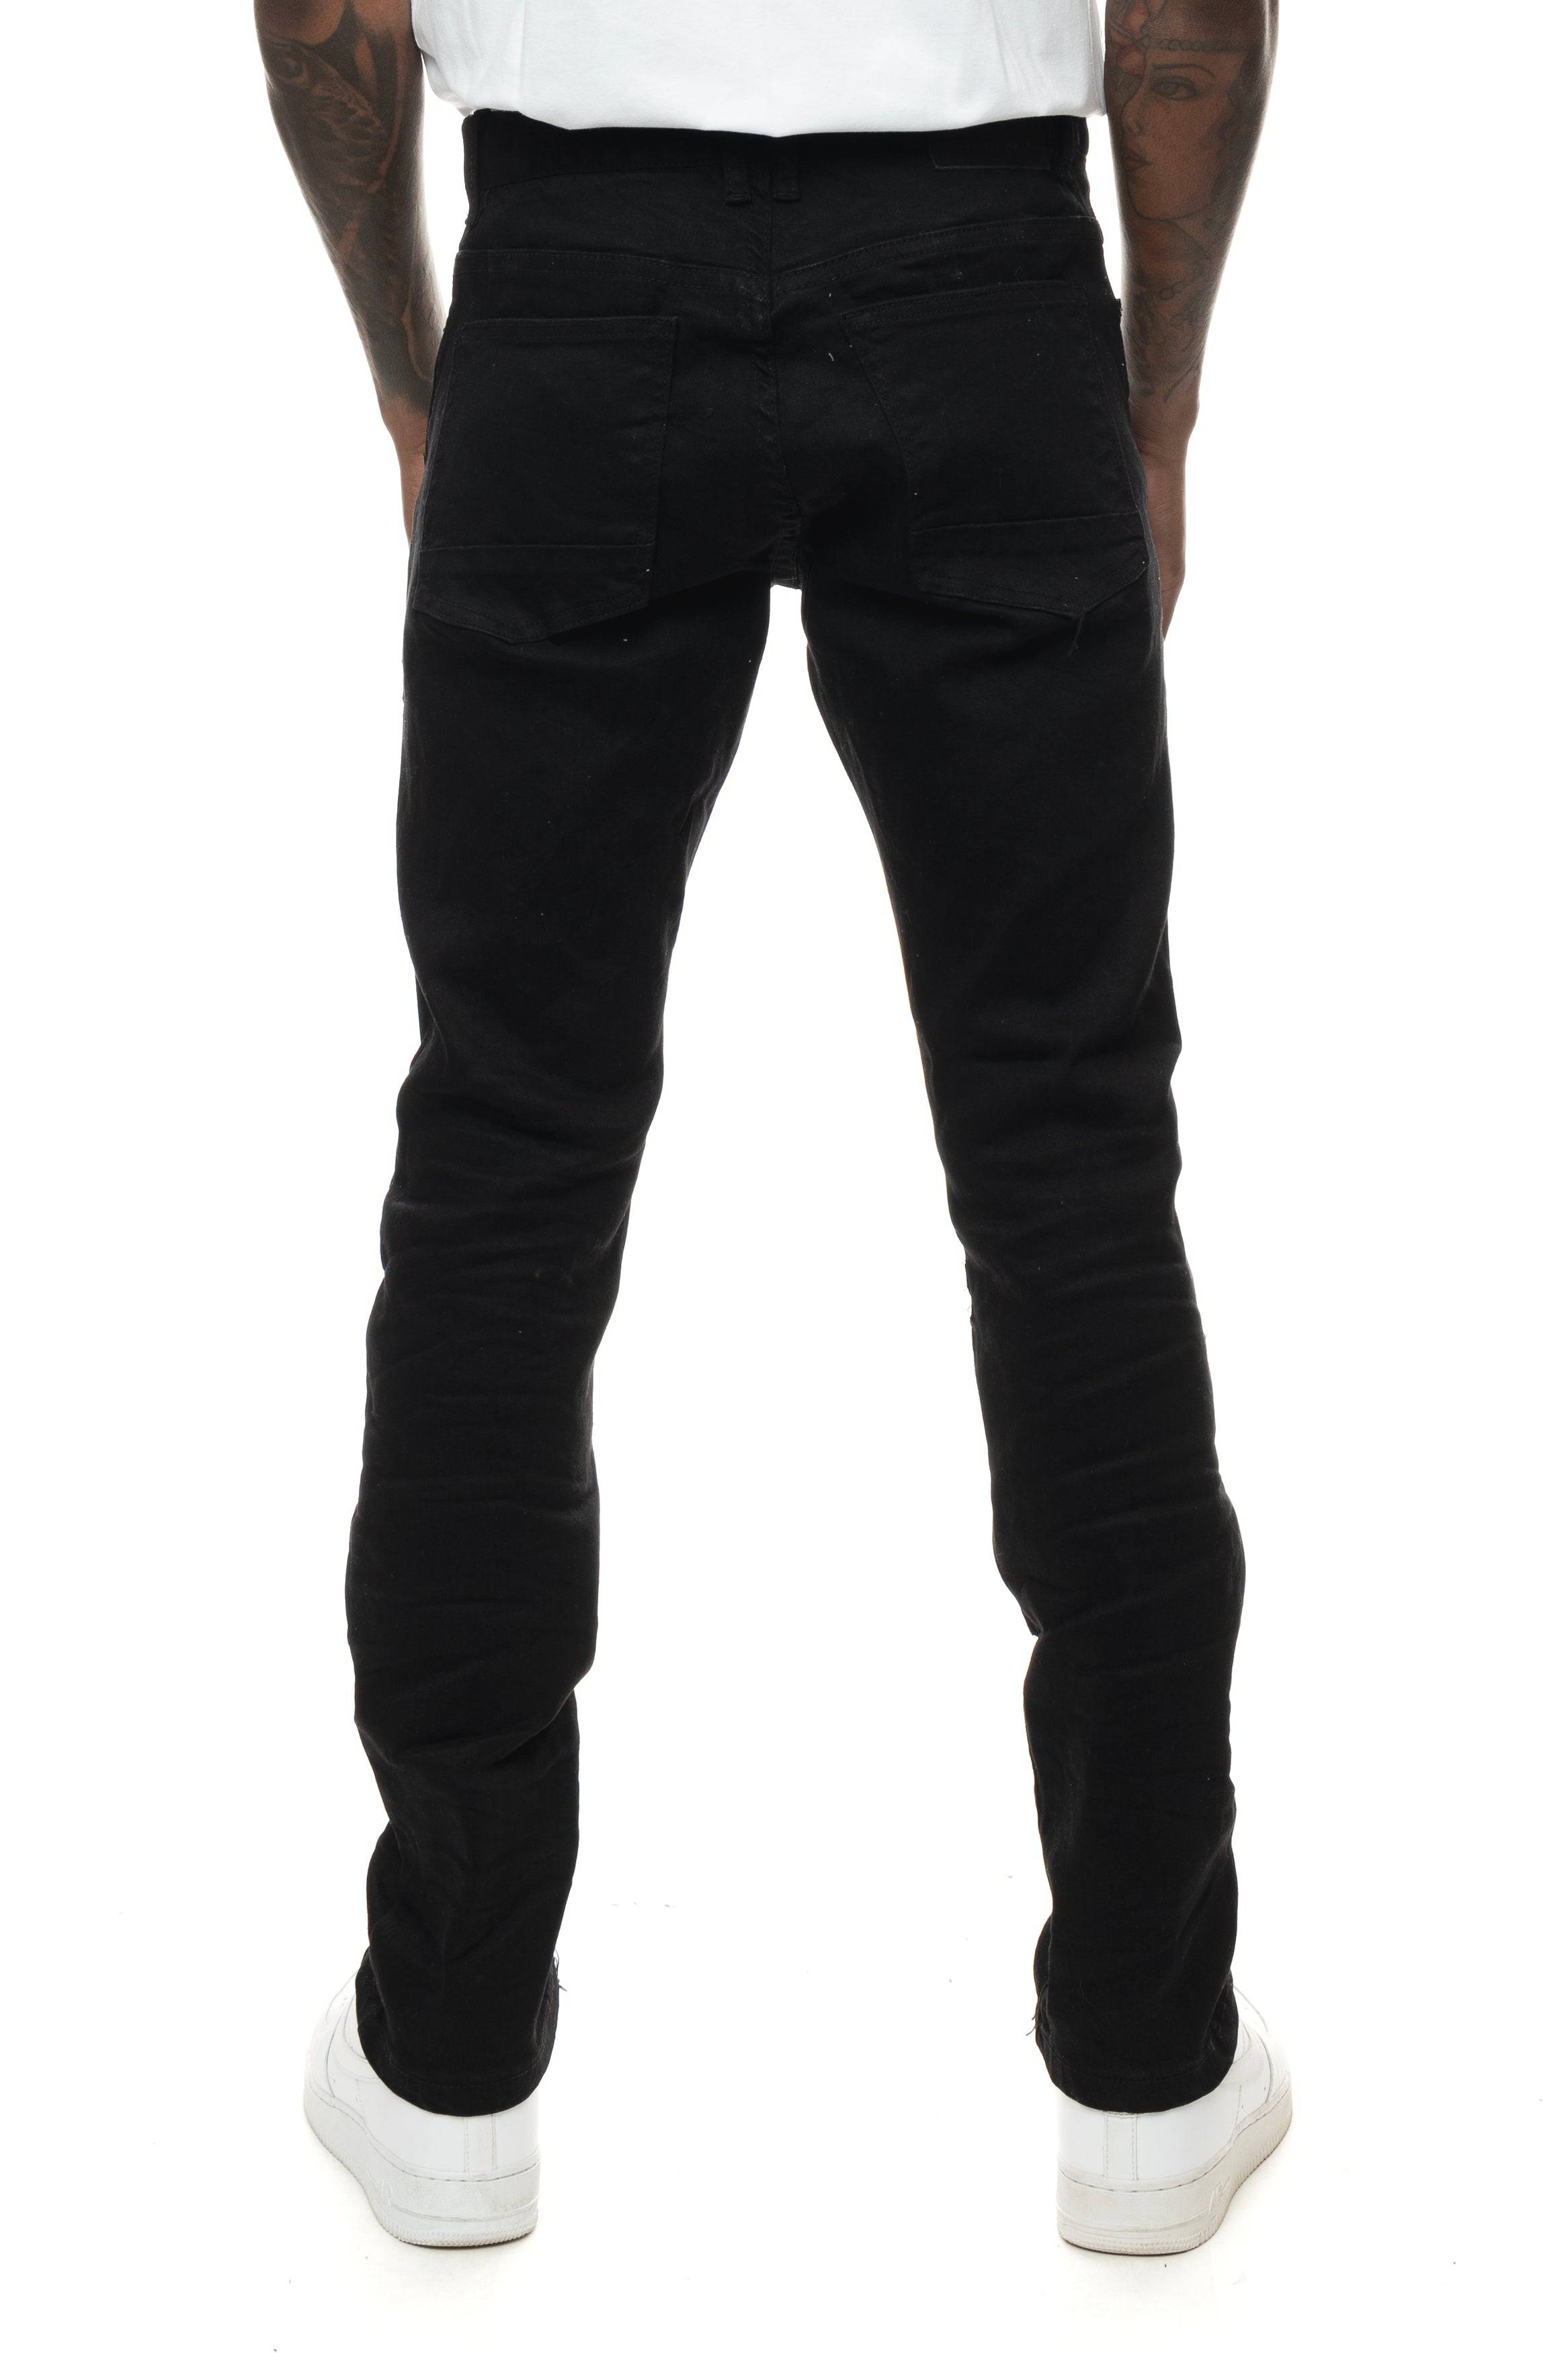 Black Core Ripped Slim Fit Jeans, Jeans